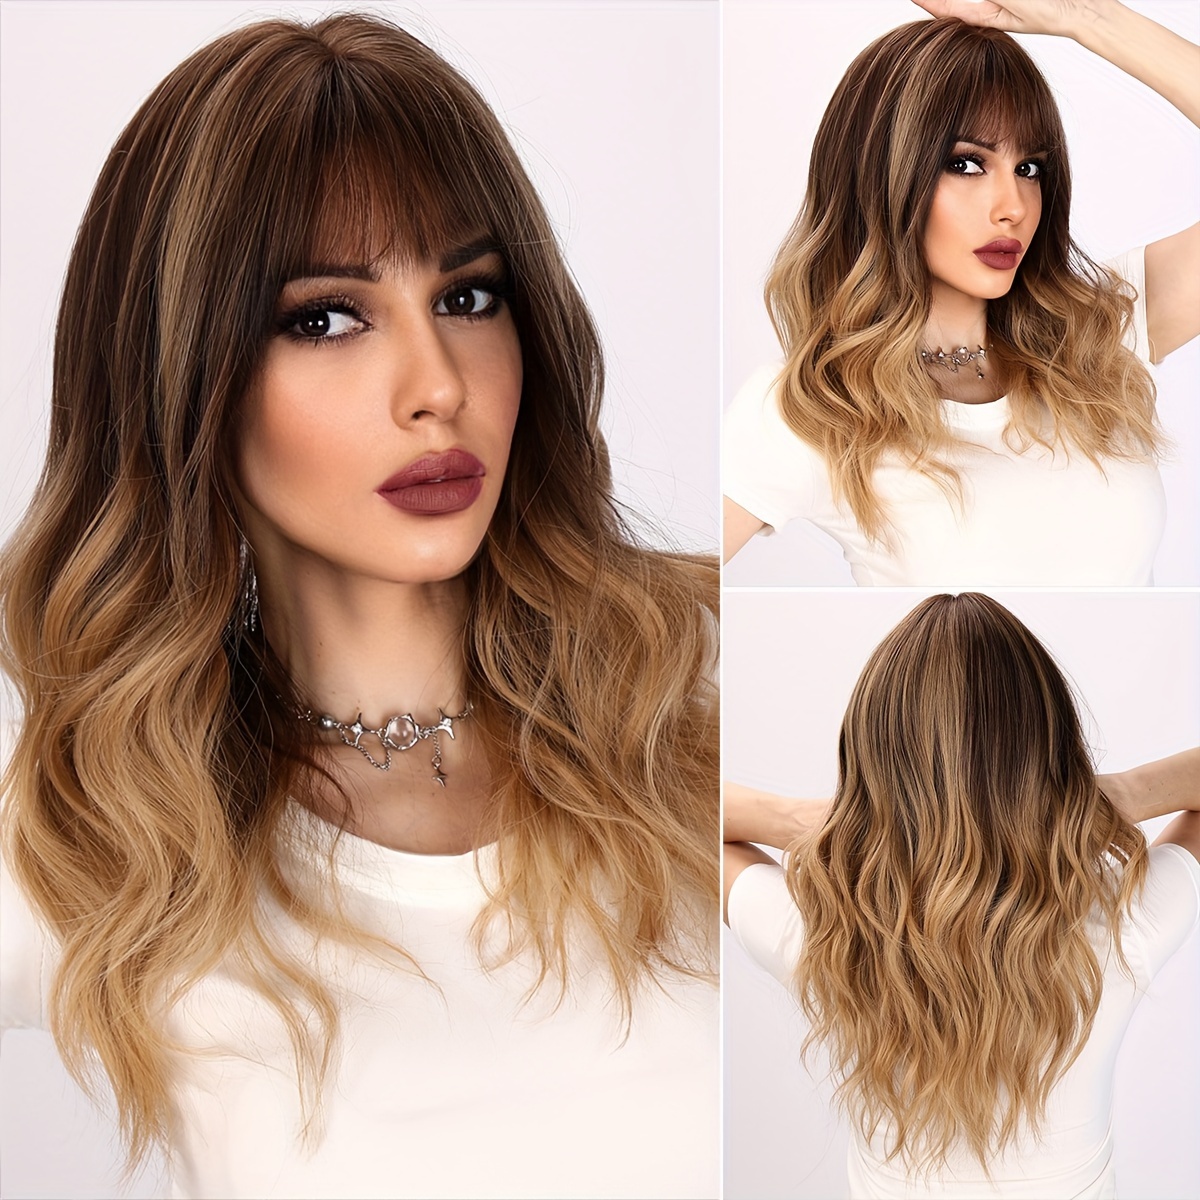 

Smilco 22 Inch Black Brown Gradient Curly Bangs Synthetic Fiber Wig - Heat-resistant, Easy To Shape, Paired With A Comfortable Rose Mesh Hat To Create A Daily Look